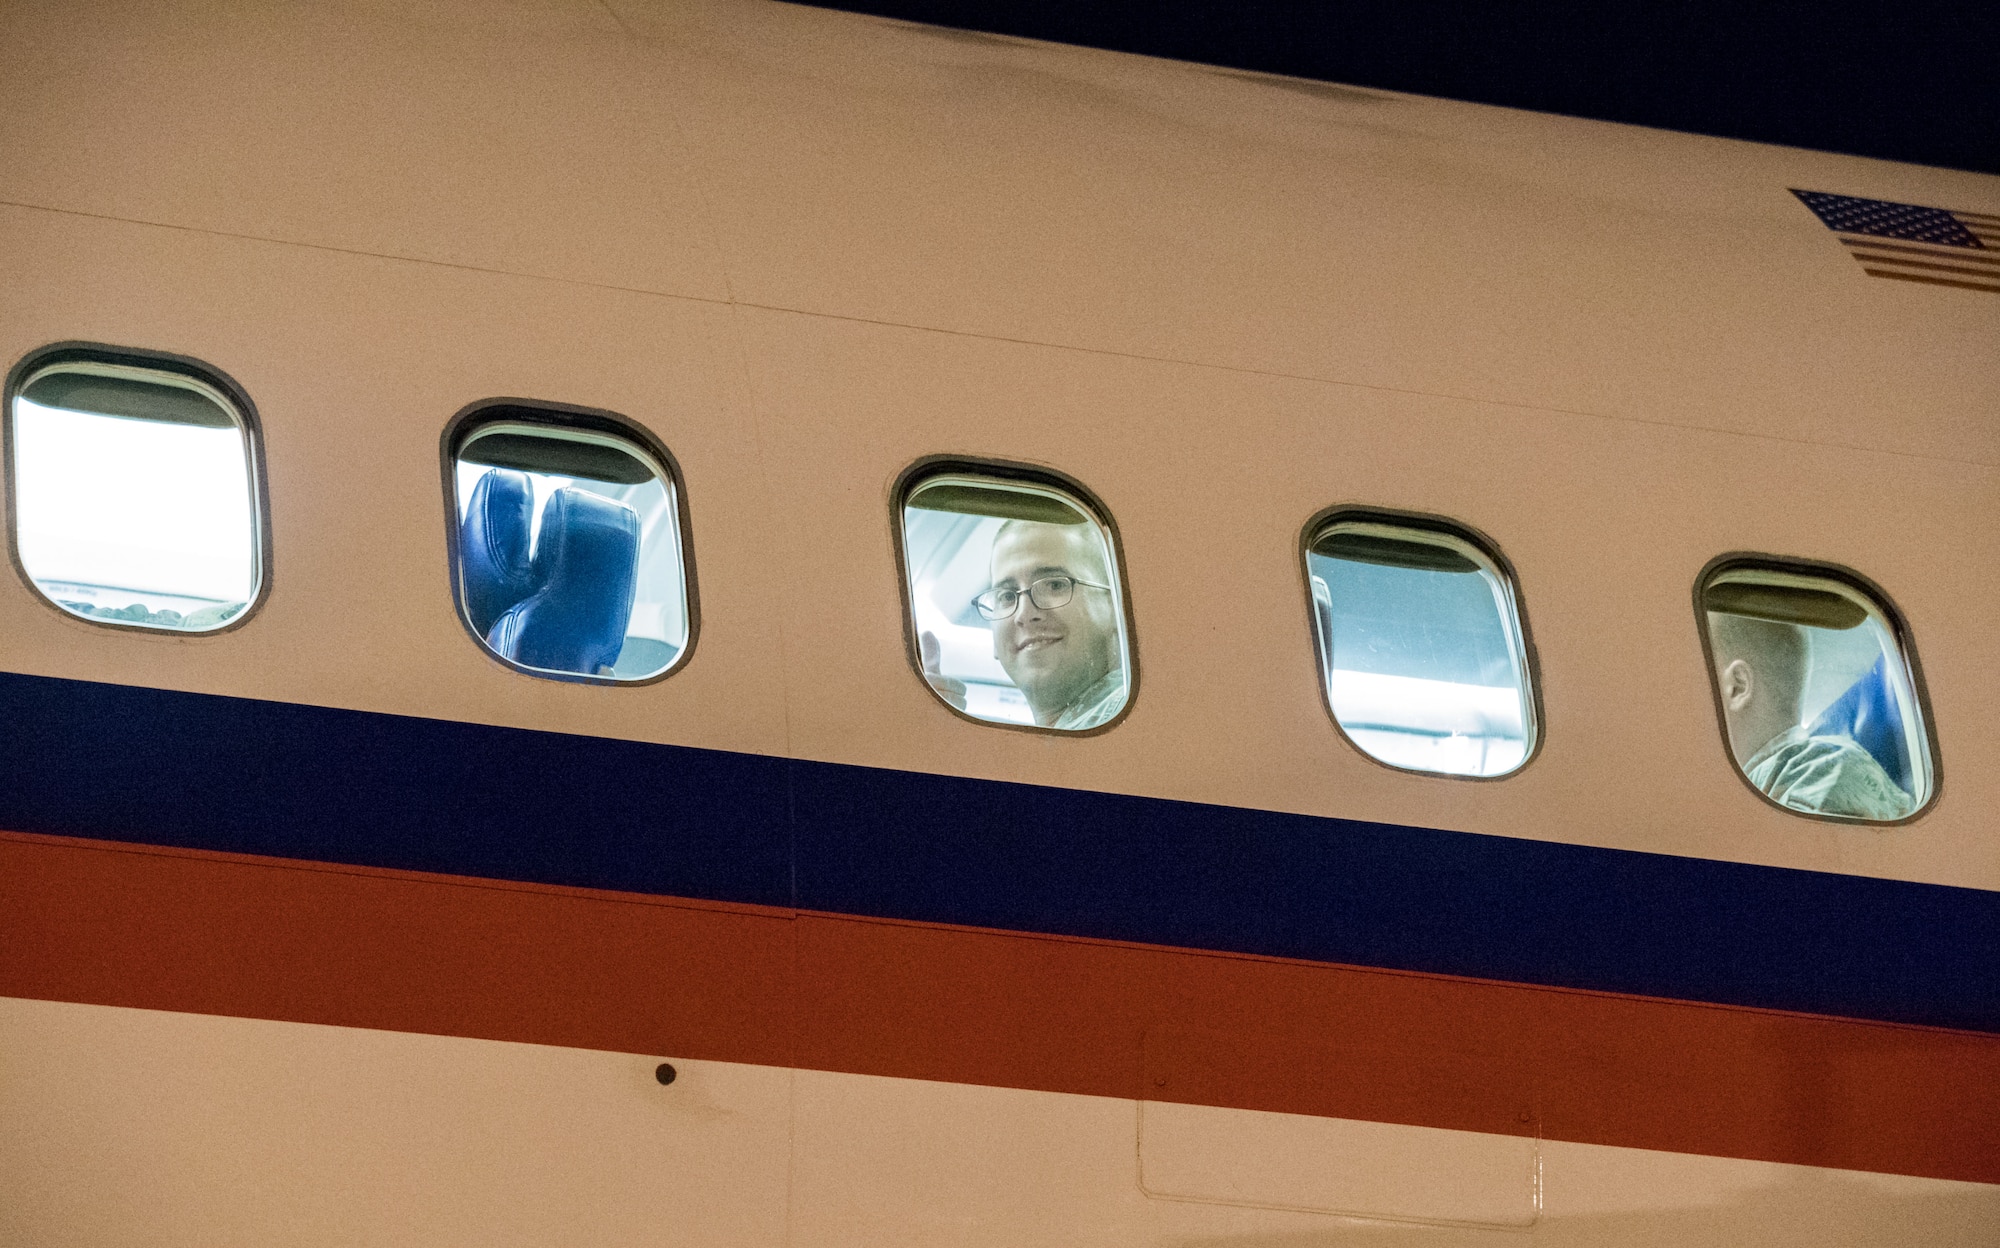 A Team Dover member smiles while looking out the window of an Air Transport International Boeing 757-200 Sept. 8, 2019, at Dover Air Force Base, Del. The ATI aircraft, part of the Civil Reserve Air Fleet program, was contracted to transport cargo and 30 Team Dover members to Fairchild AFB, Wash., participating in Mobility Guardian 2019. “In support of exercise Mobility Guardian 2019, Air Mobility Command contracted commercial aircraft to simulate activating CRAF marking the first time, in a long time, AMC has exercised a commercial component of its wartime plan,” said Maj. Adam Crane, AMC Headquarters CRAF Branch Chief, Scott AFB, Ill. (U.S. Air Force photo by Roland Balik)